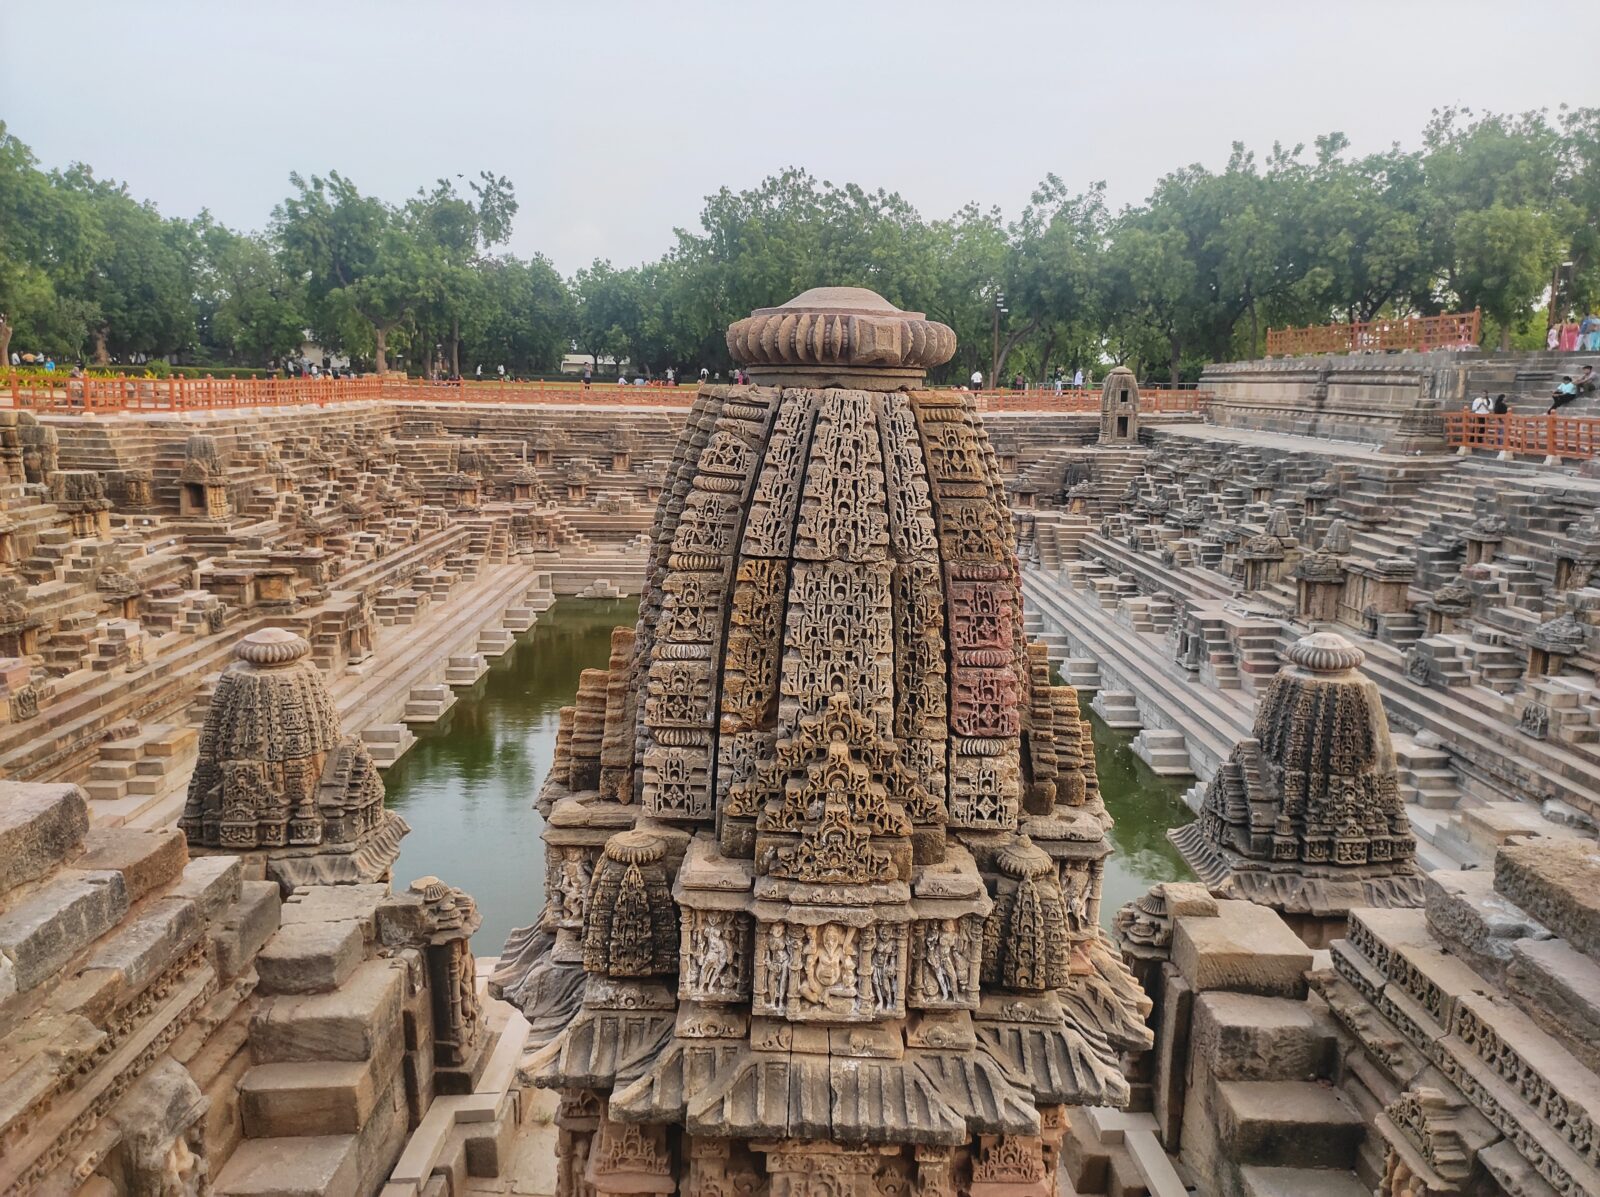 From the ruins of – Sun Temple, Modhera